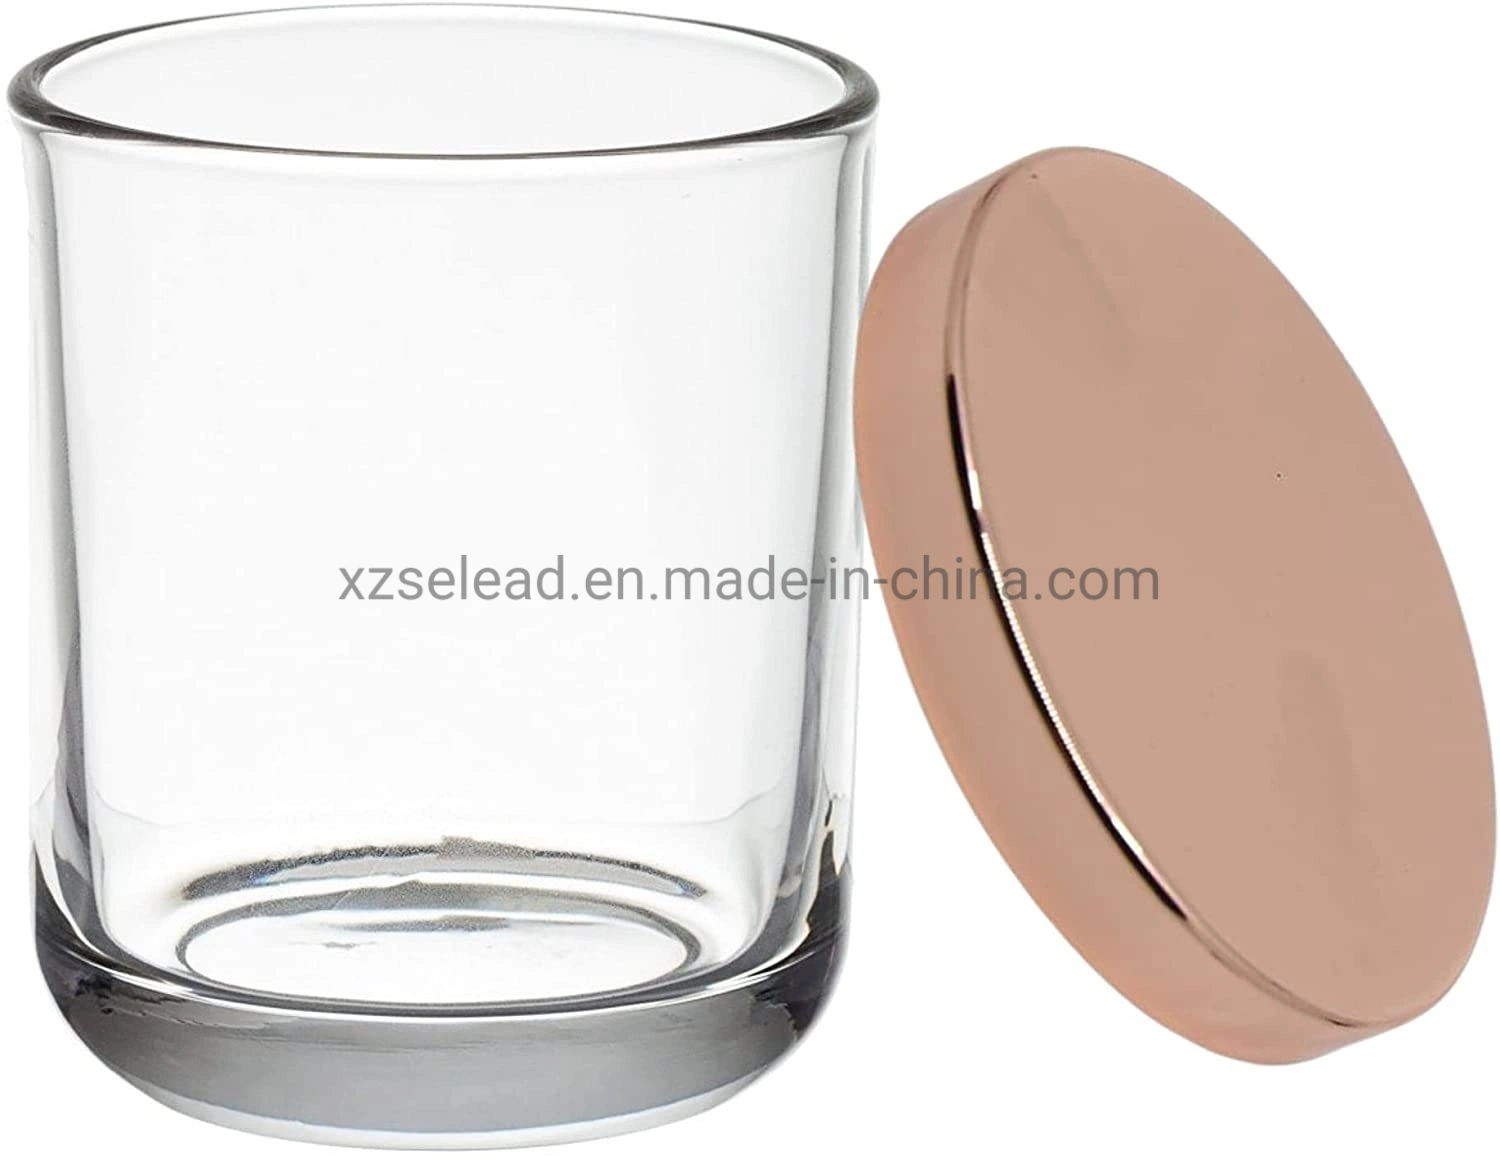 Glass Jars and Lids for Candle Making 8.5oz Glass Candle Jars and Holders with Metal Lids for Candles Diffuser Bottle